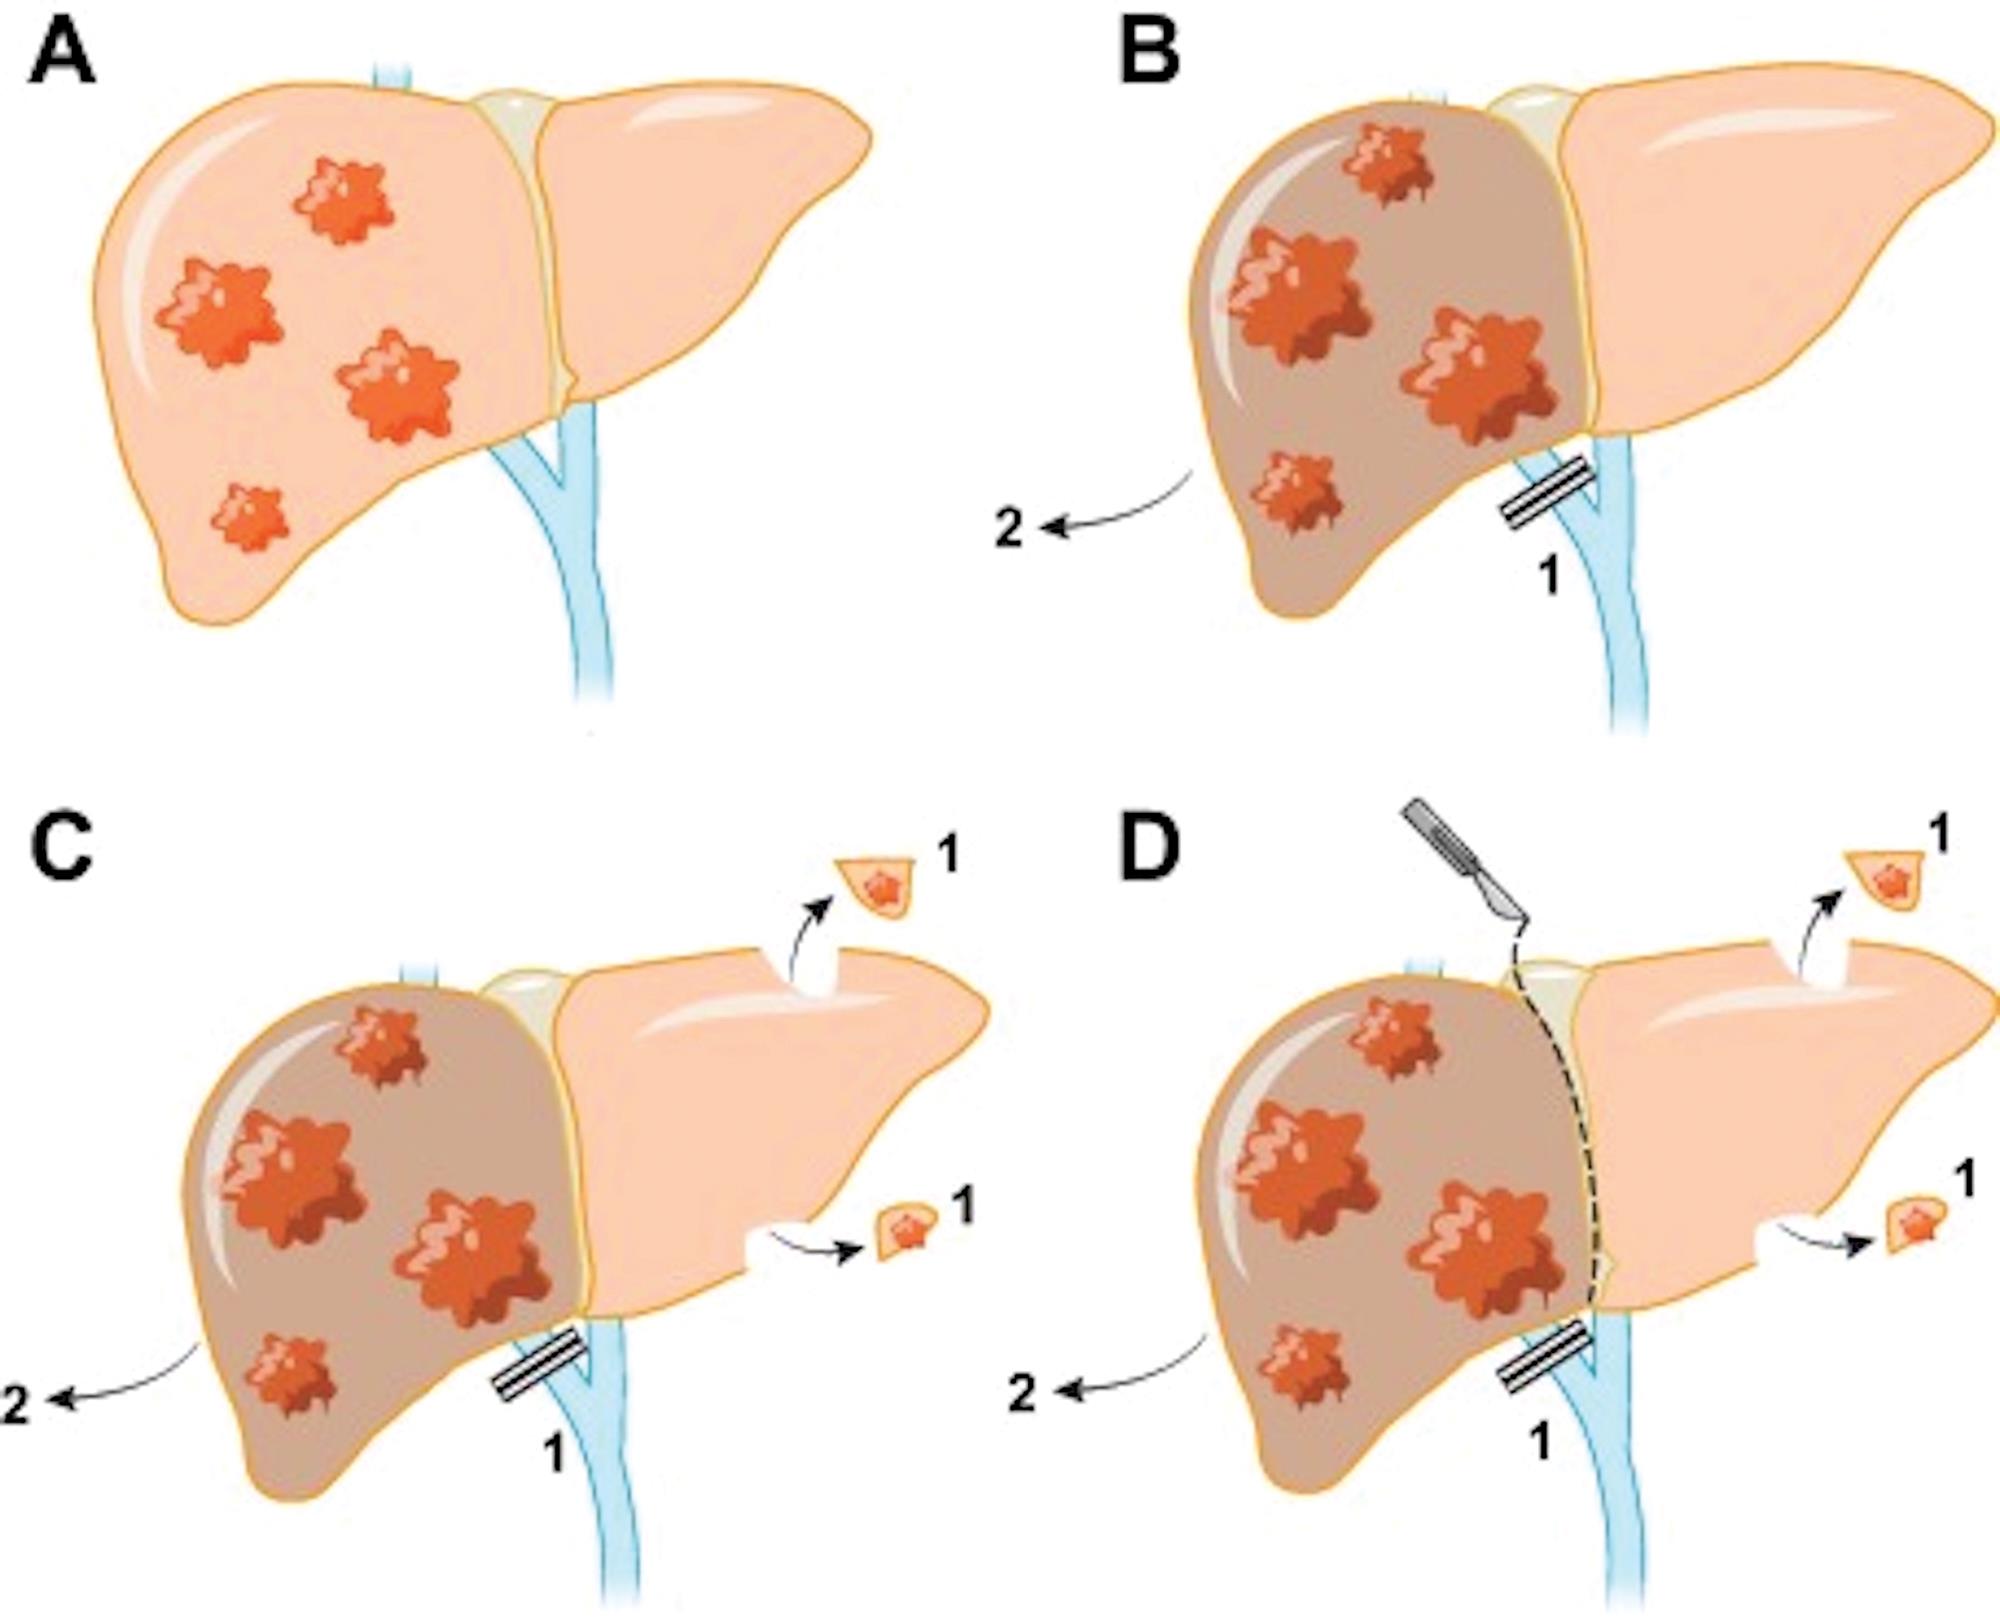 Visualization of pre- or perioperative interventions and their effect on liver remnant volume.